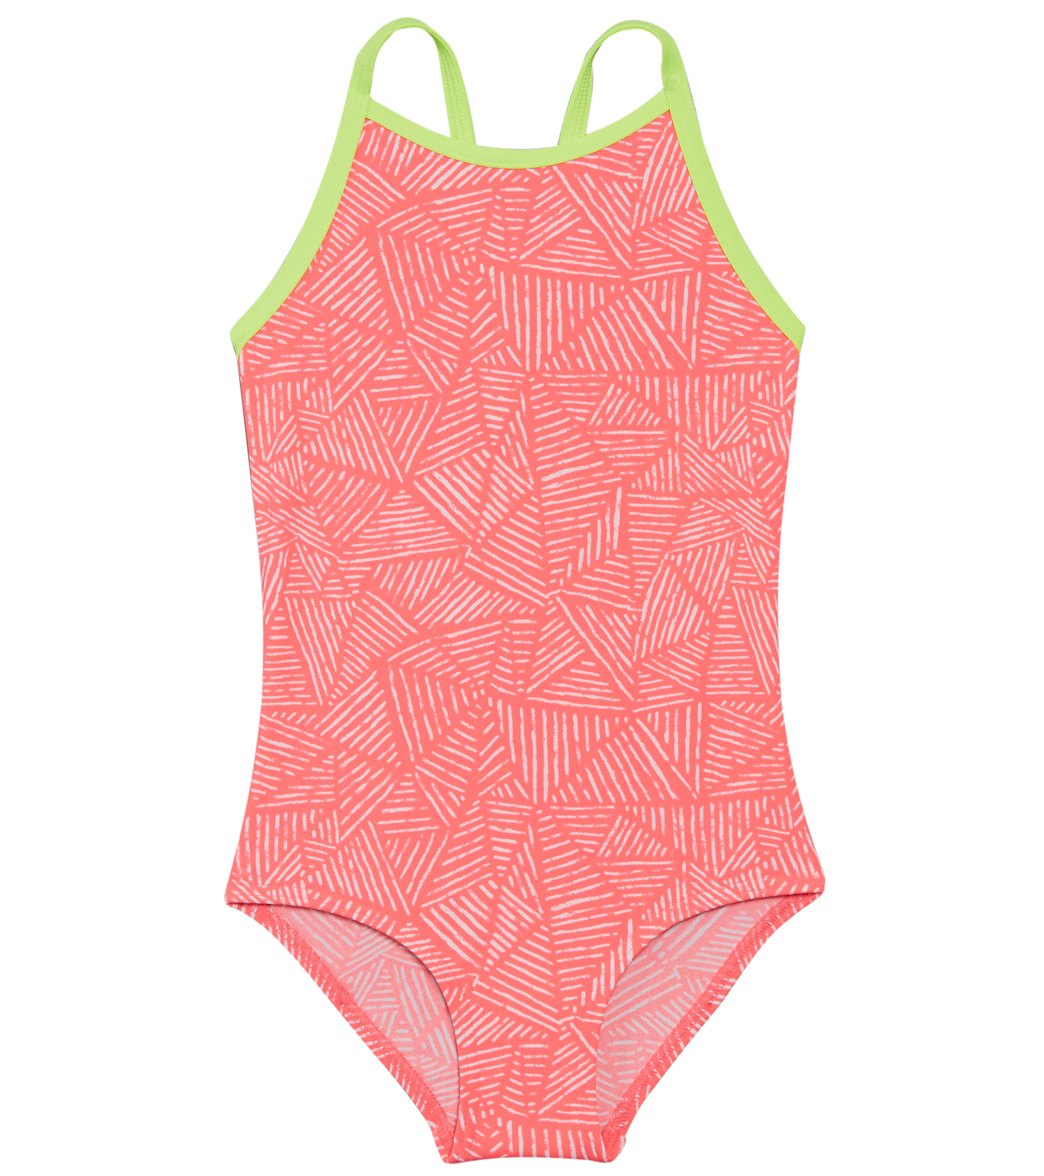 Funkita Toddler Girls' Sweet Venom Printed One Piece Swimsuit - Pink 1 Polyester - Swimoutlet.com